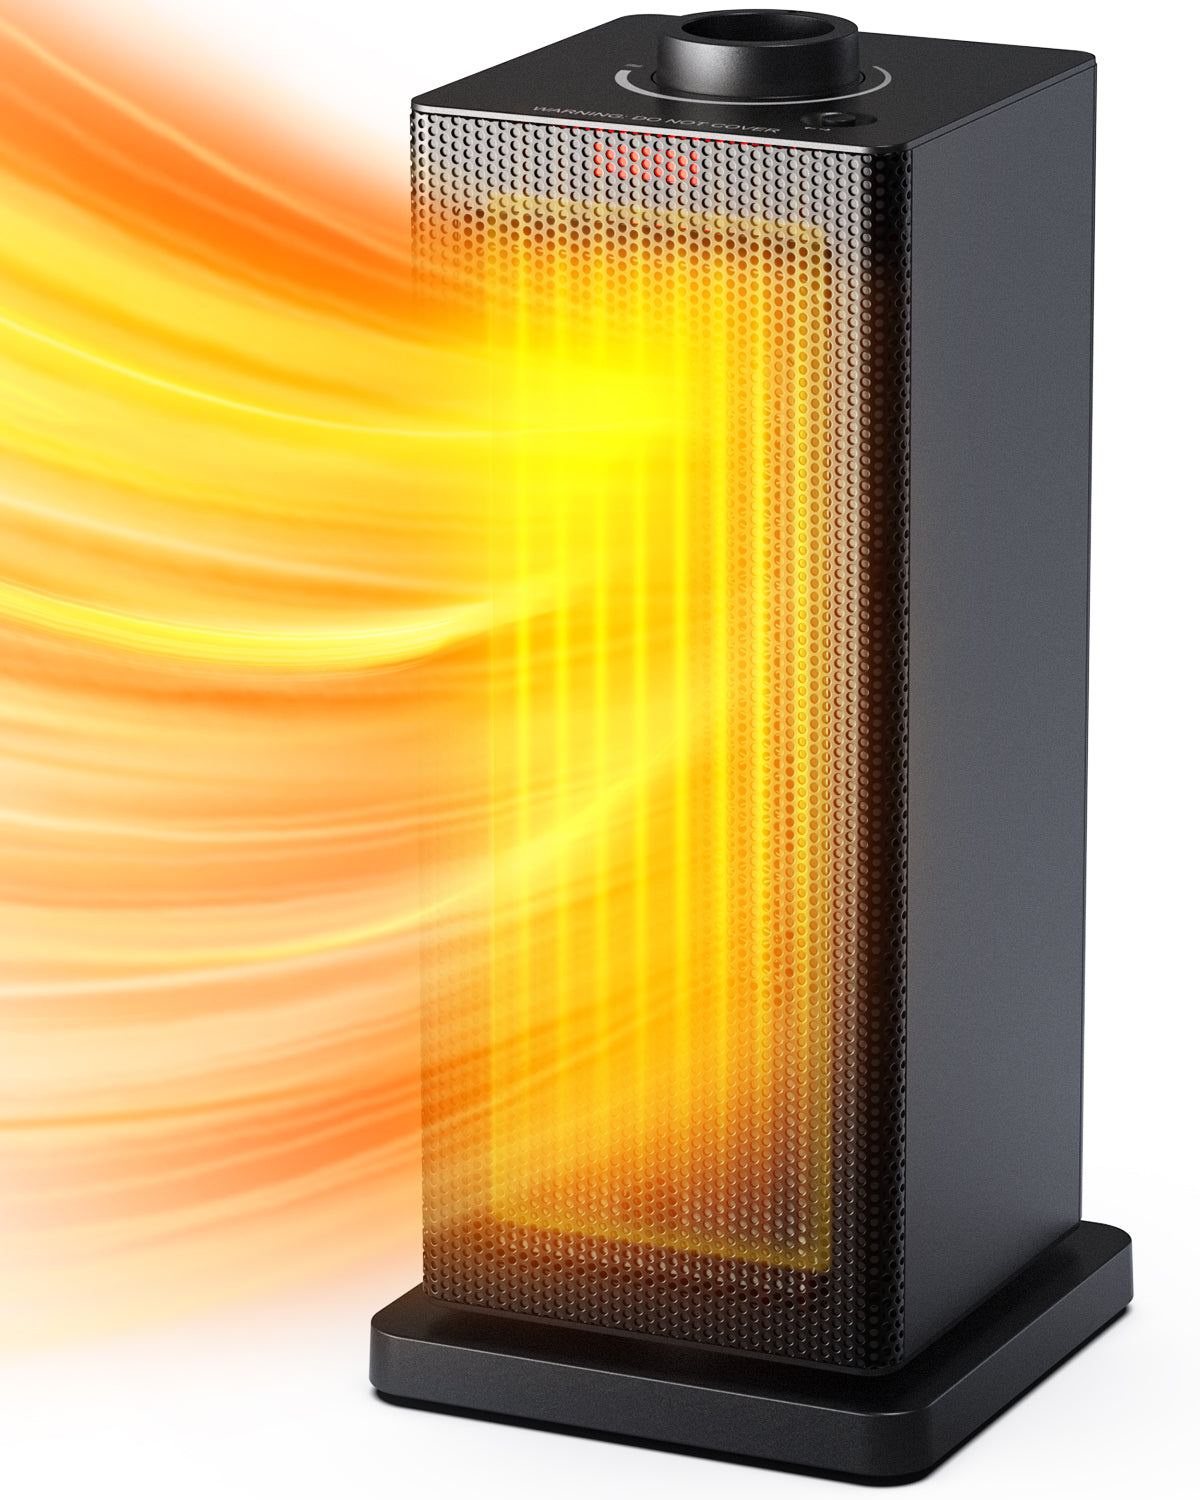 Alrocket 1500W Ceramic Space Heater - Features Built-in Timer and Oscillation Black